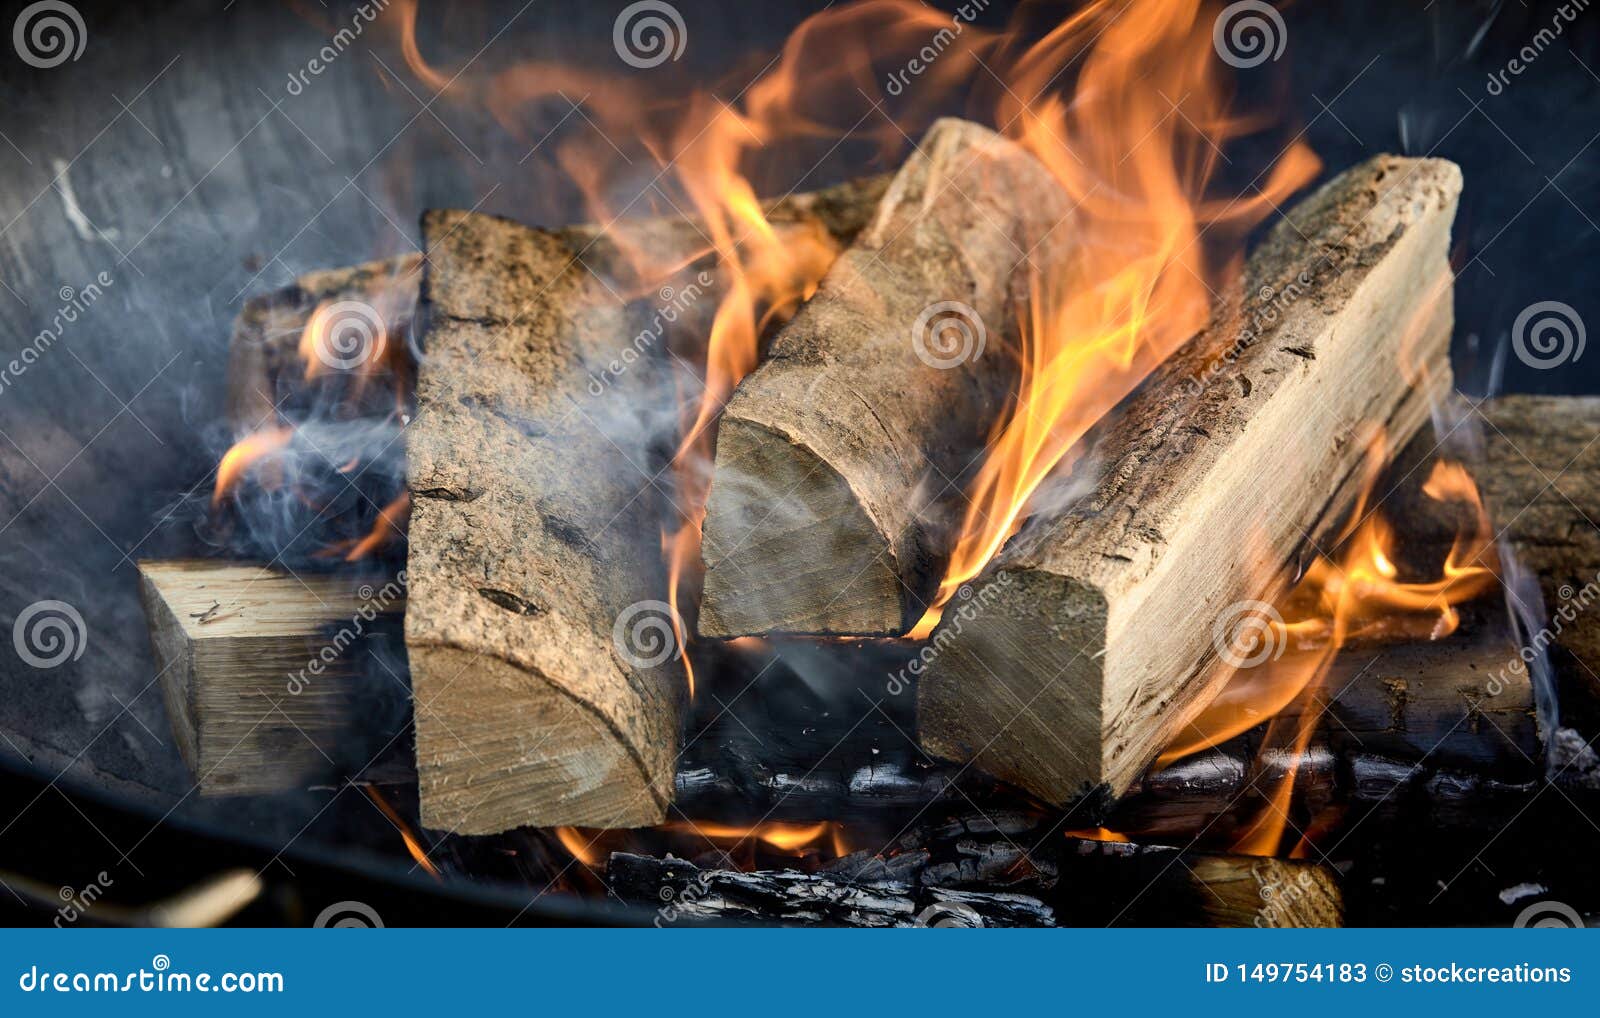 recently lit fire with logs of flaming wood